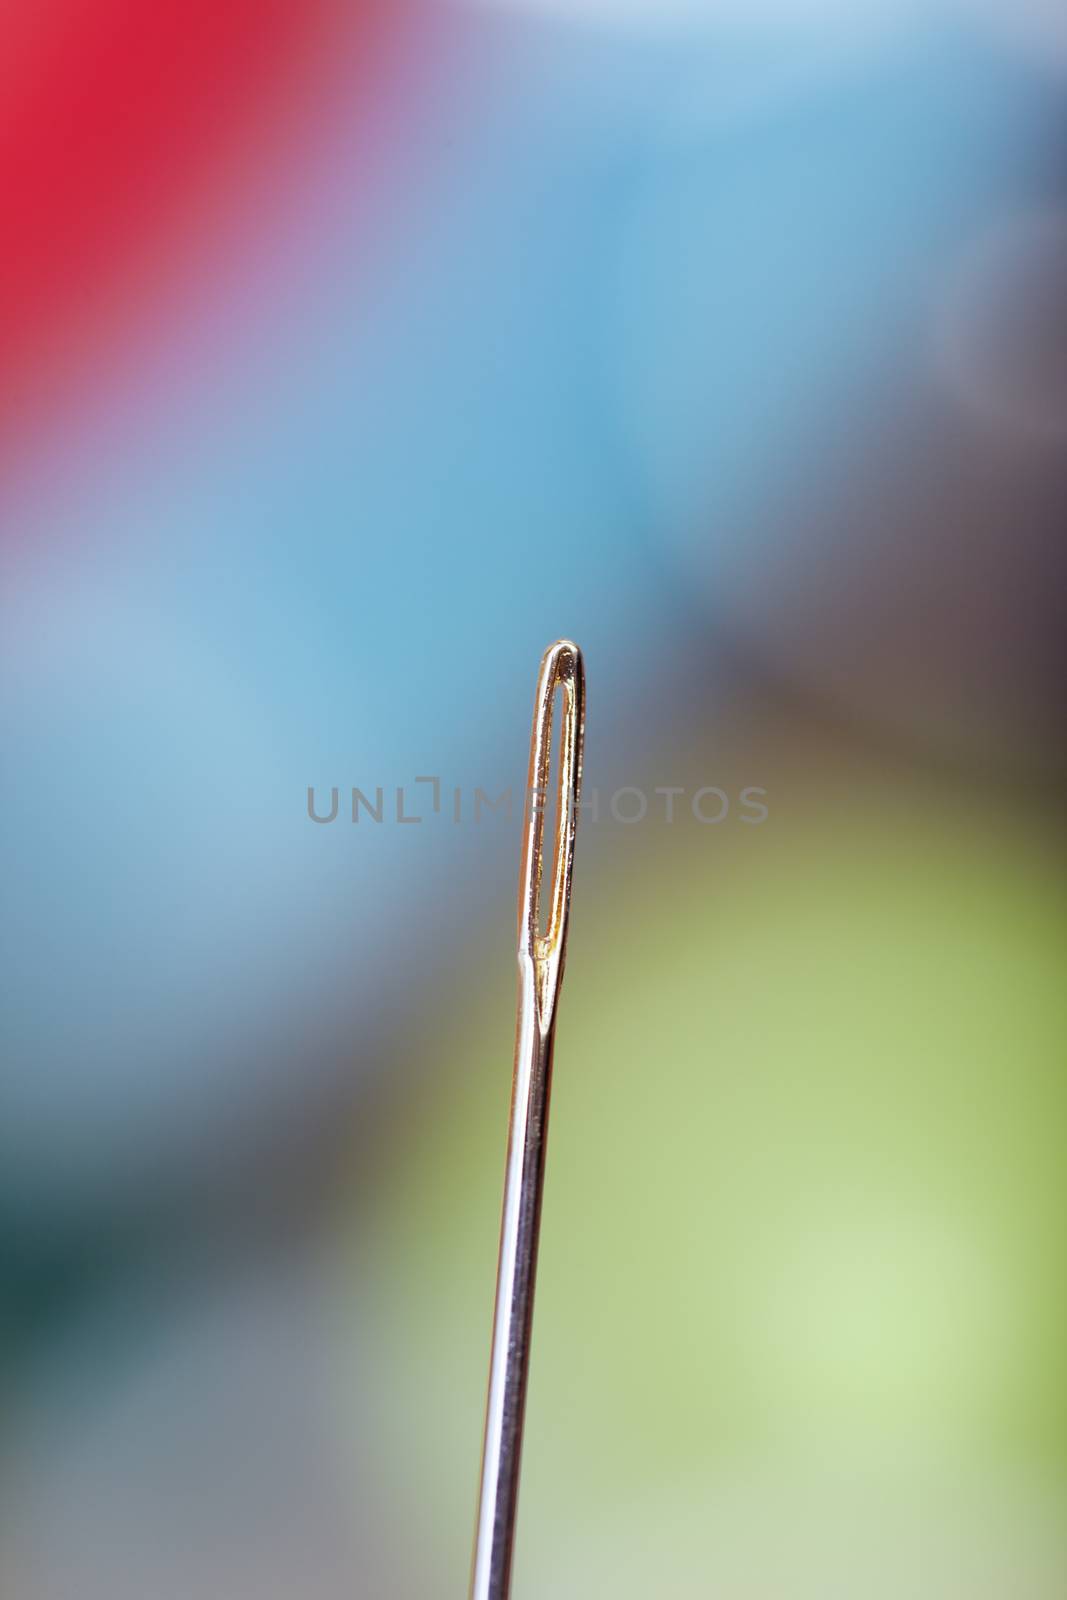 Sewing needle on a colorful background. Extremely close-up photo